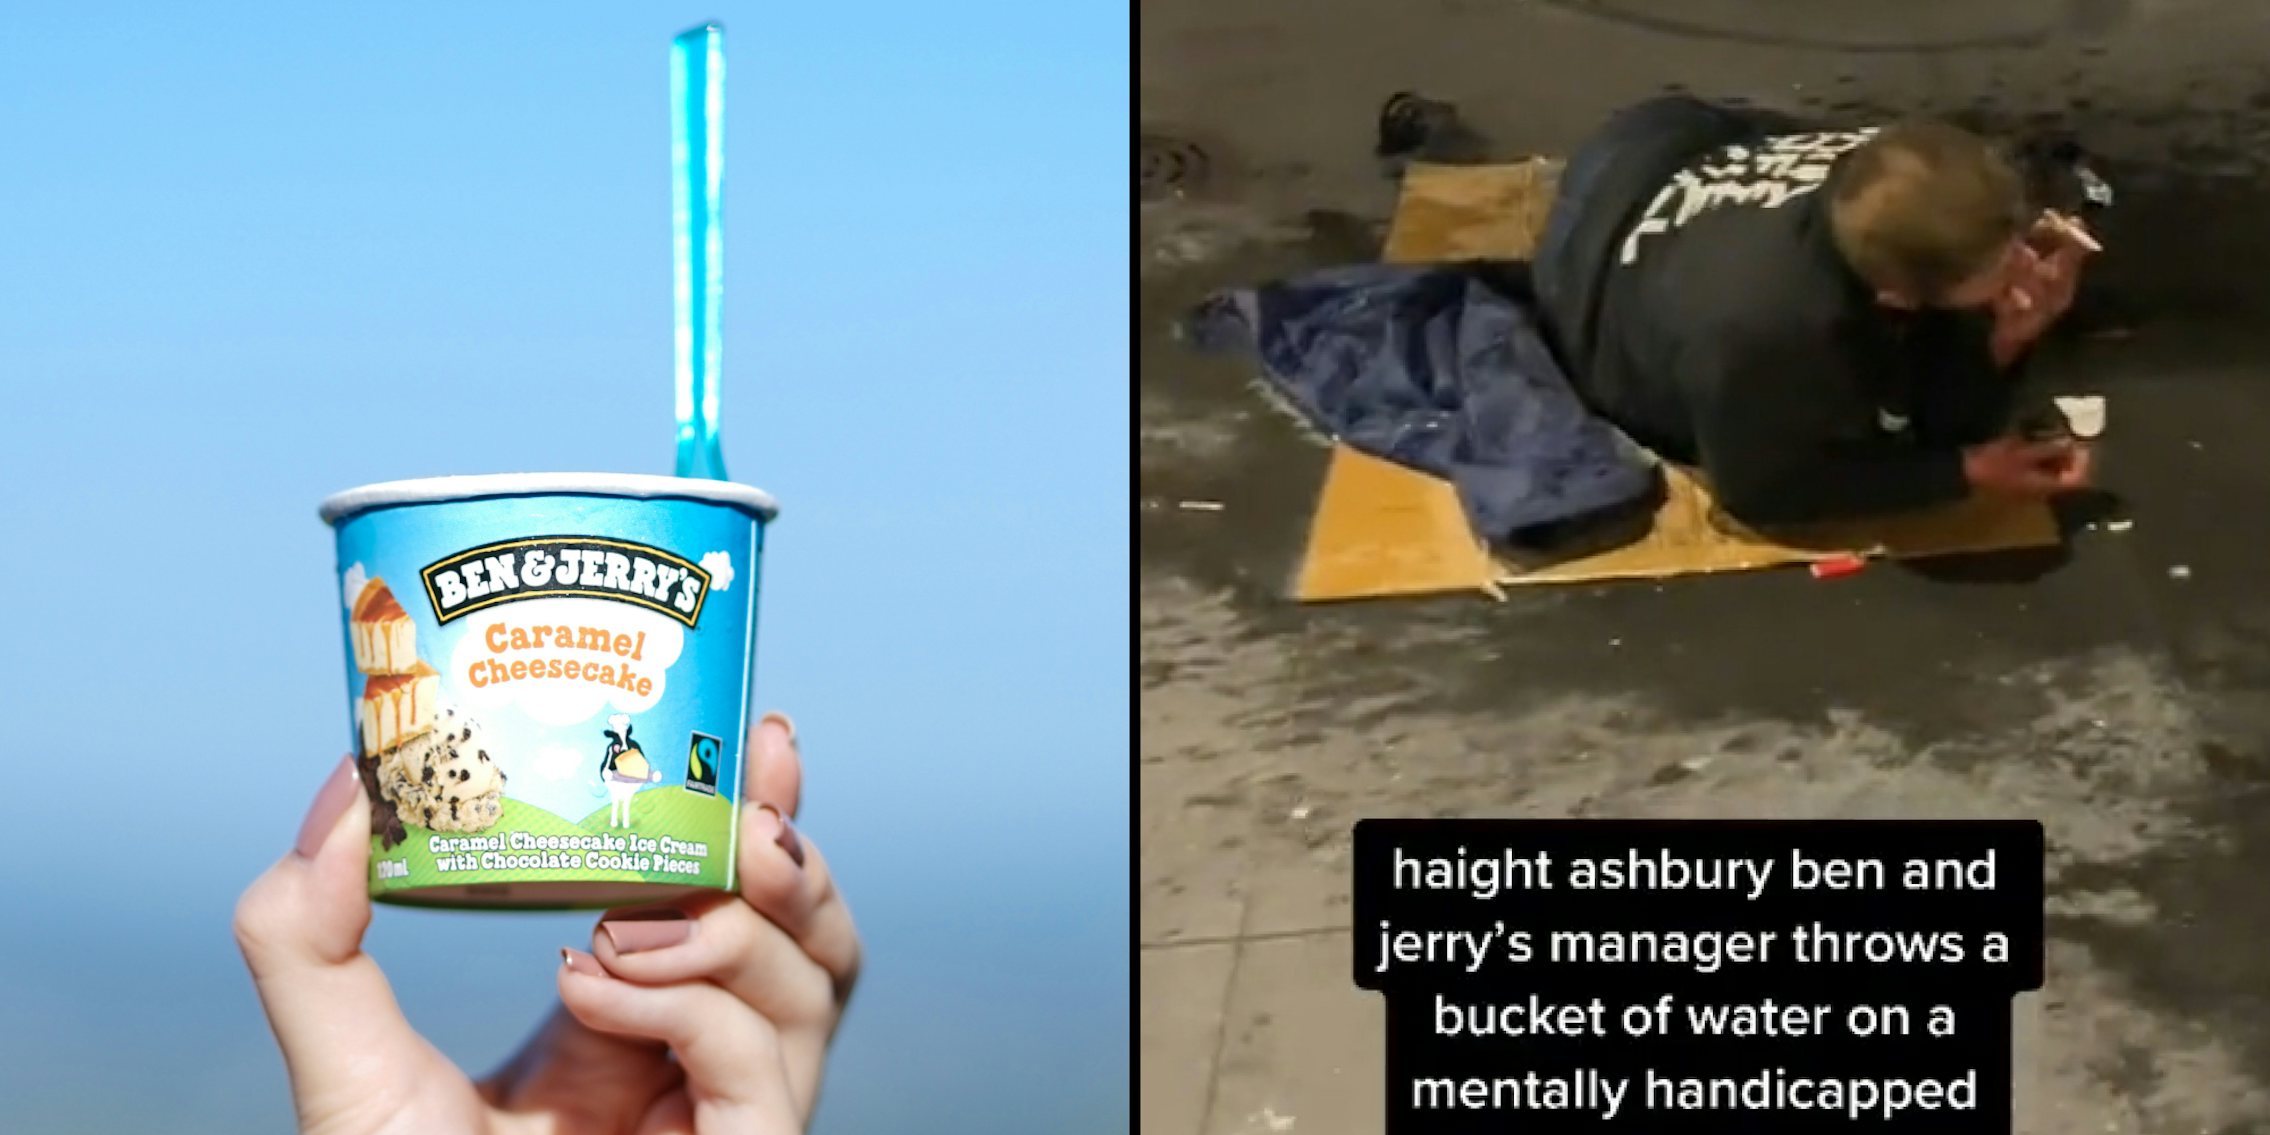 Ben and Jerry's icecream in hand on blue background (l) Homeless handicapped woman on ground caption ' haight ashbury ben and jerrry's manager throws a bucket of water on a mentally handicapped' (r)